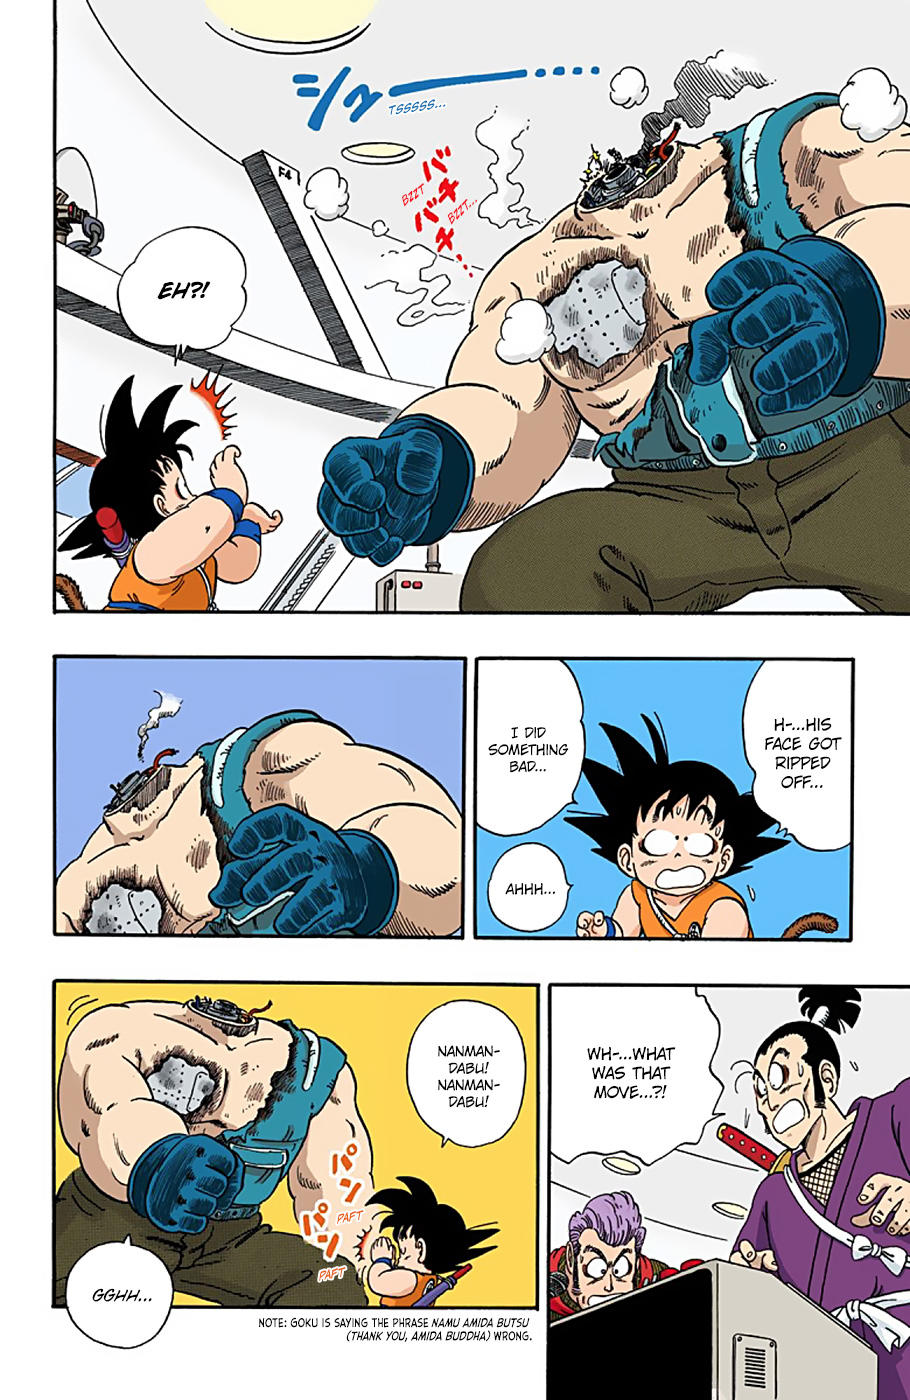 Dragon Ball - Full Color Edition Vol.5 Chapter 59: The Demon On The Third Floor!! page 12 - Mangakakalot